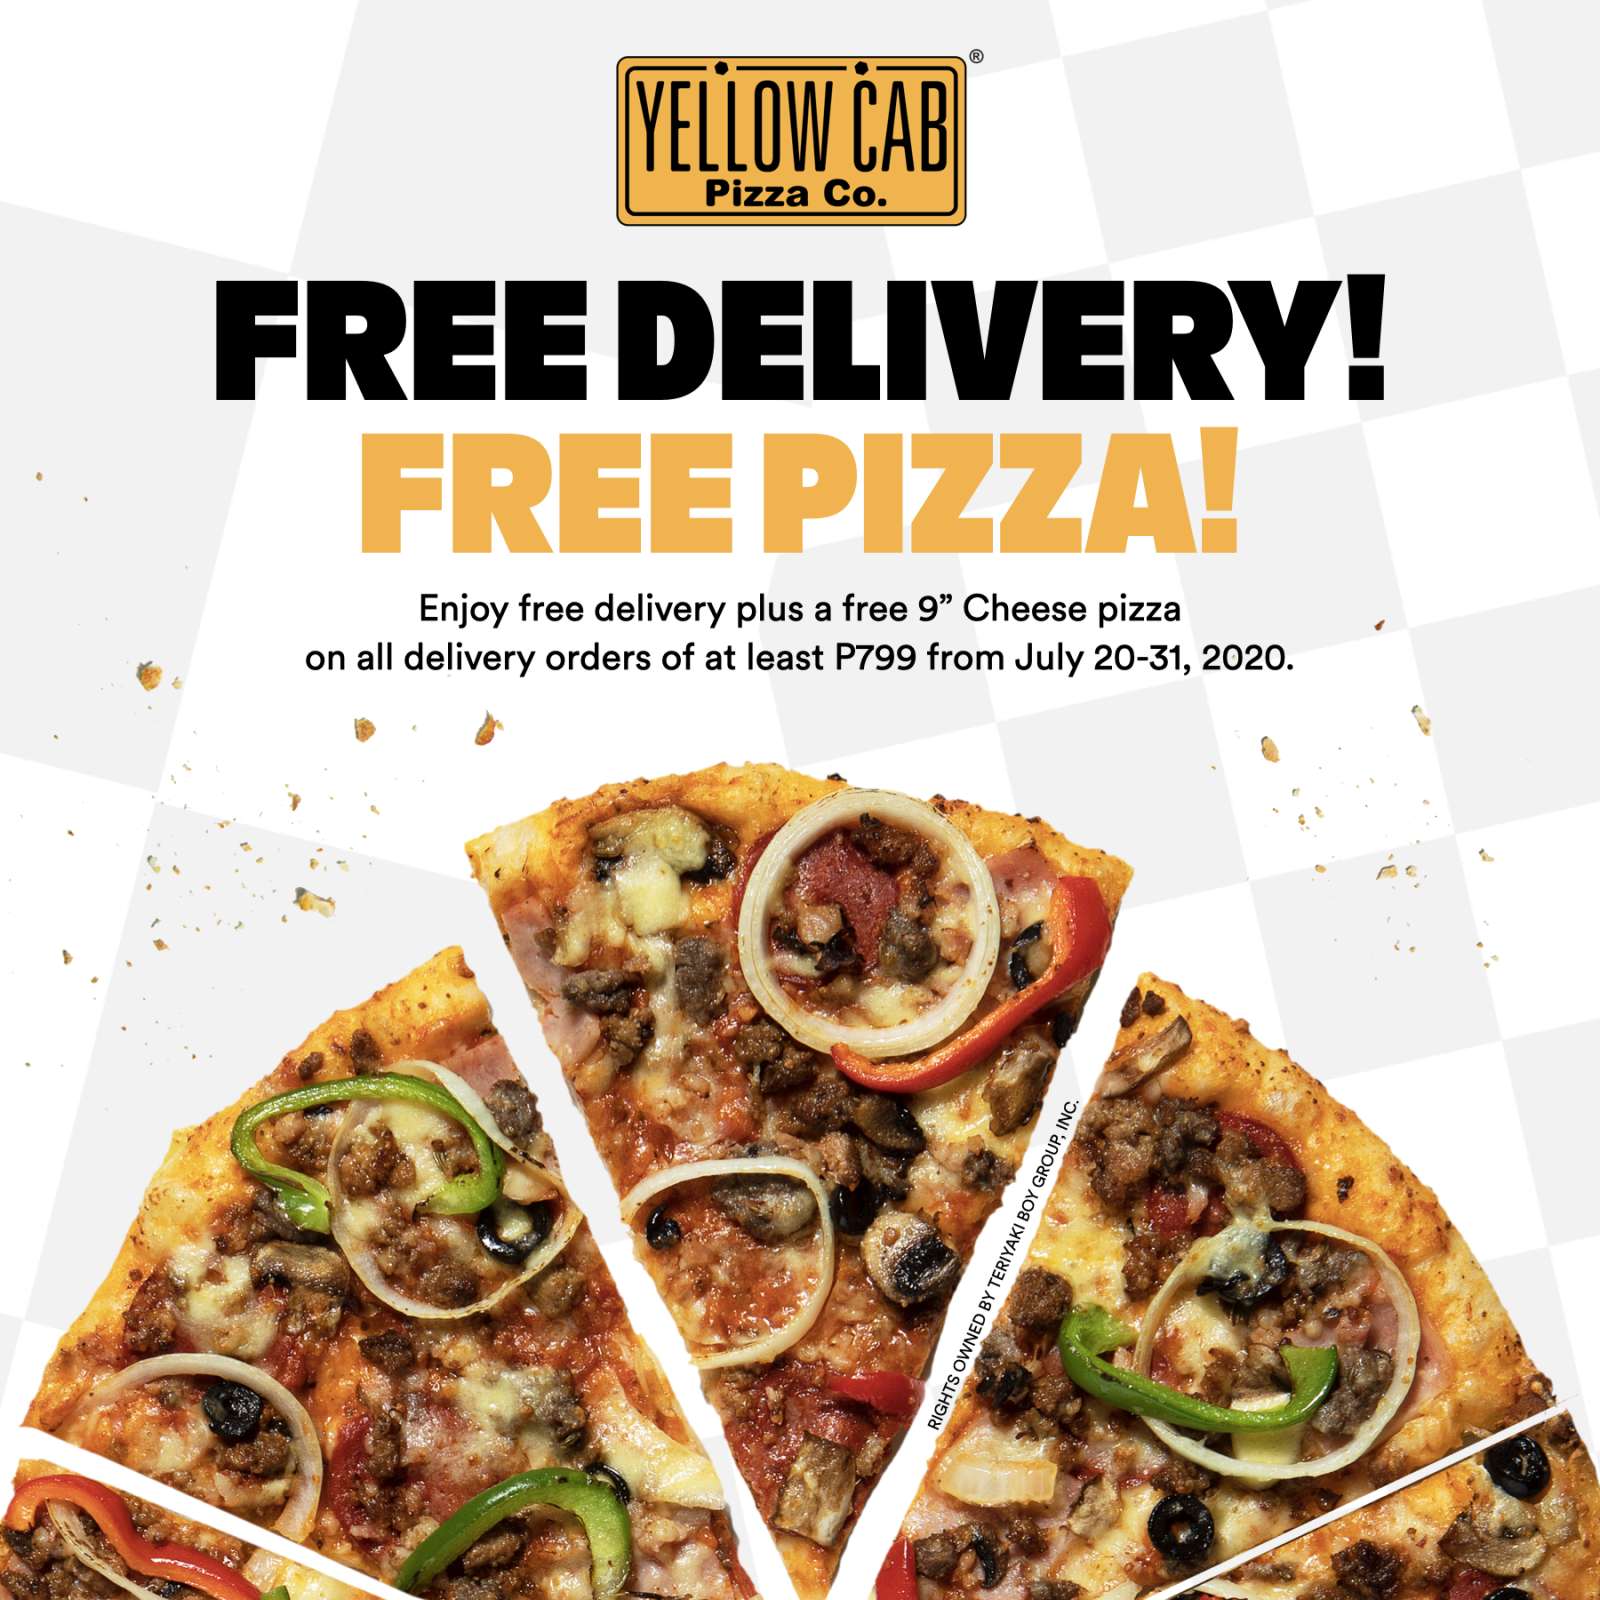 ENJOY FREE DELIVERY AND FREE PIZZA FROM YELLOW CAB UNTIL THE END OF